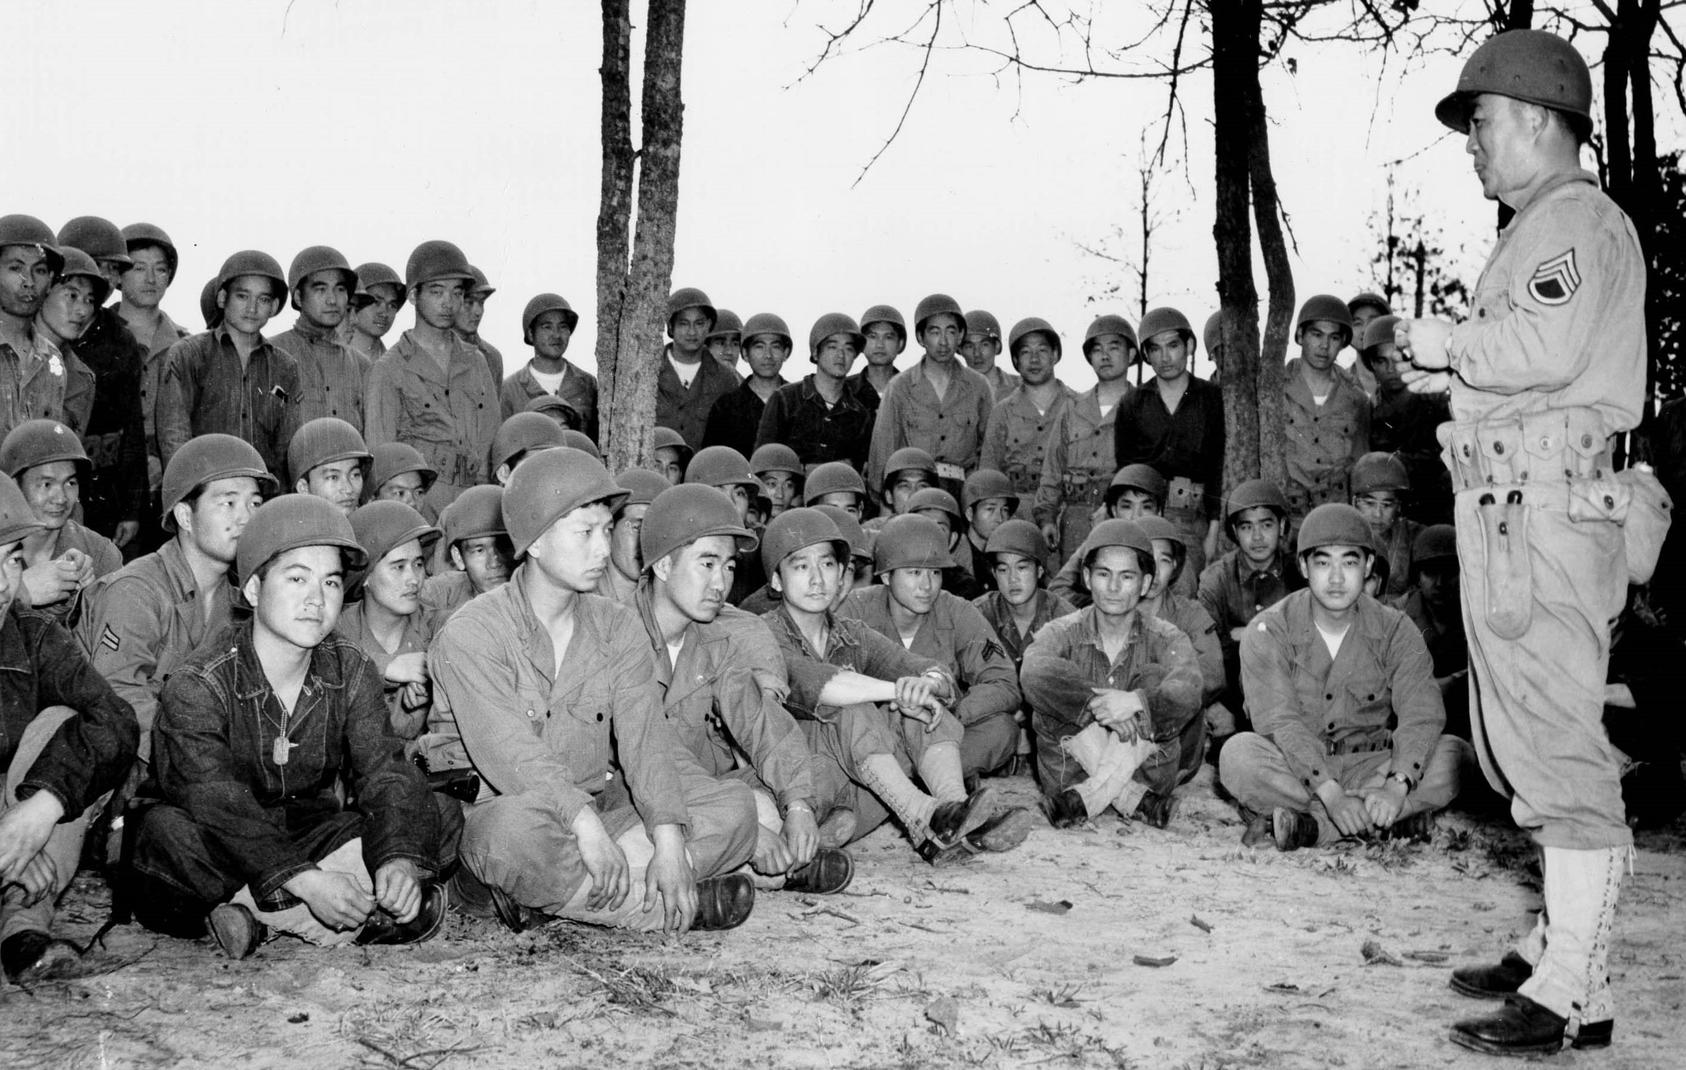 Japanese-American troops of the Army’s 100th Infantry Battalion gather during training in 1943. Lieutenant Spark Matsunaga helped lead the battalion into World War II combat in Italy. (U.S. Army)